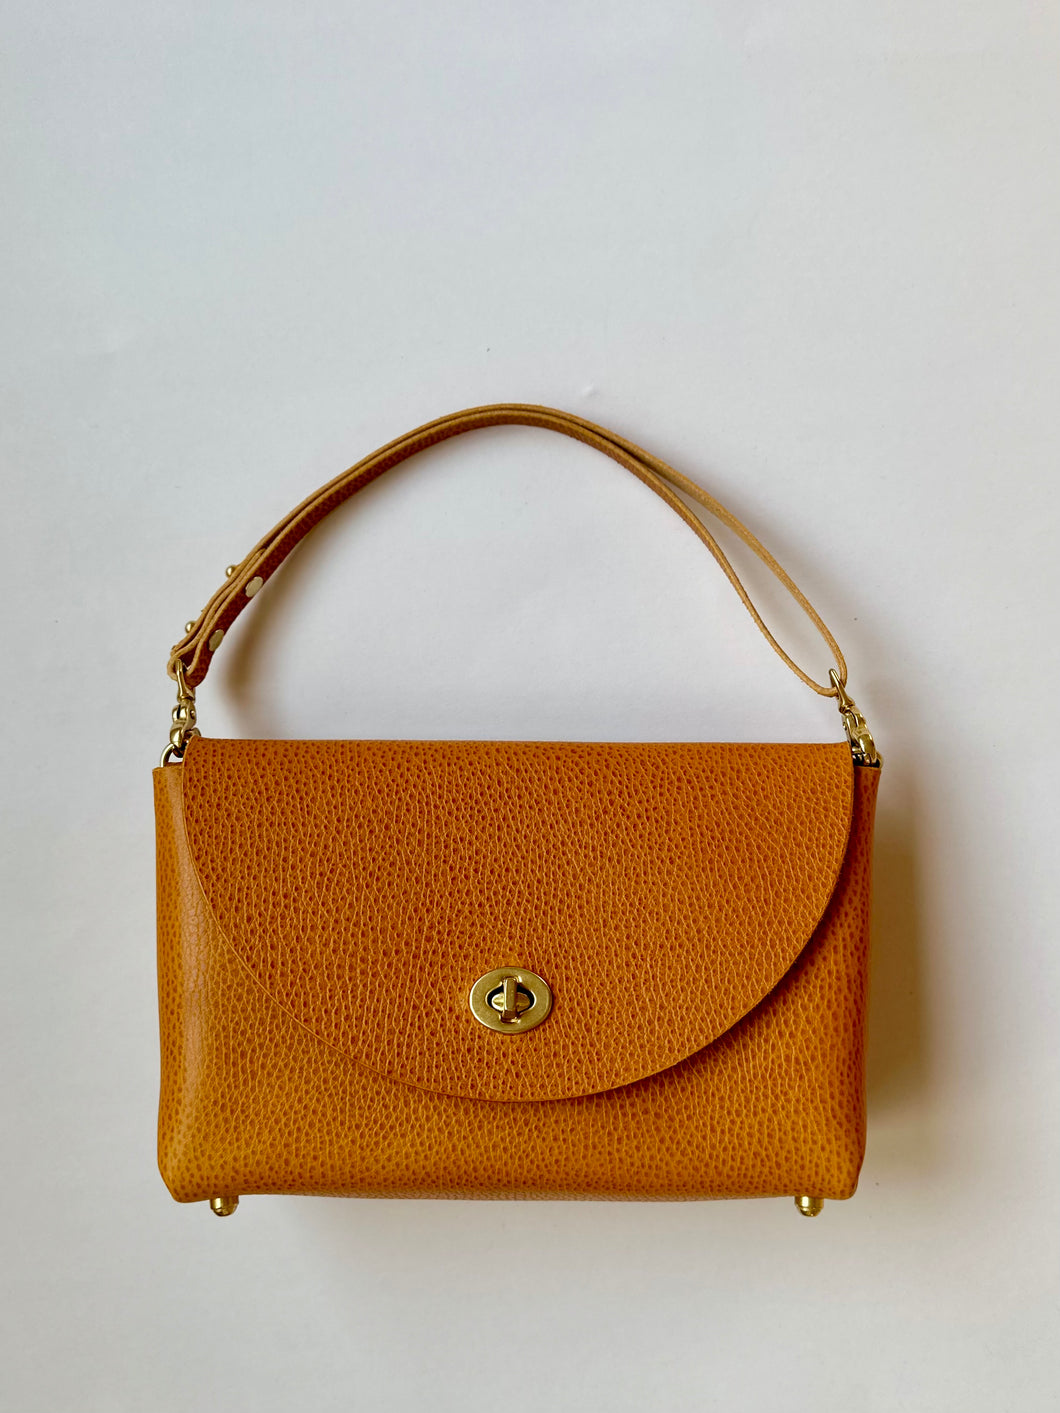 Petite Flap Bag Yellow Sapphire Leather Bag - Gemstone Collection